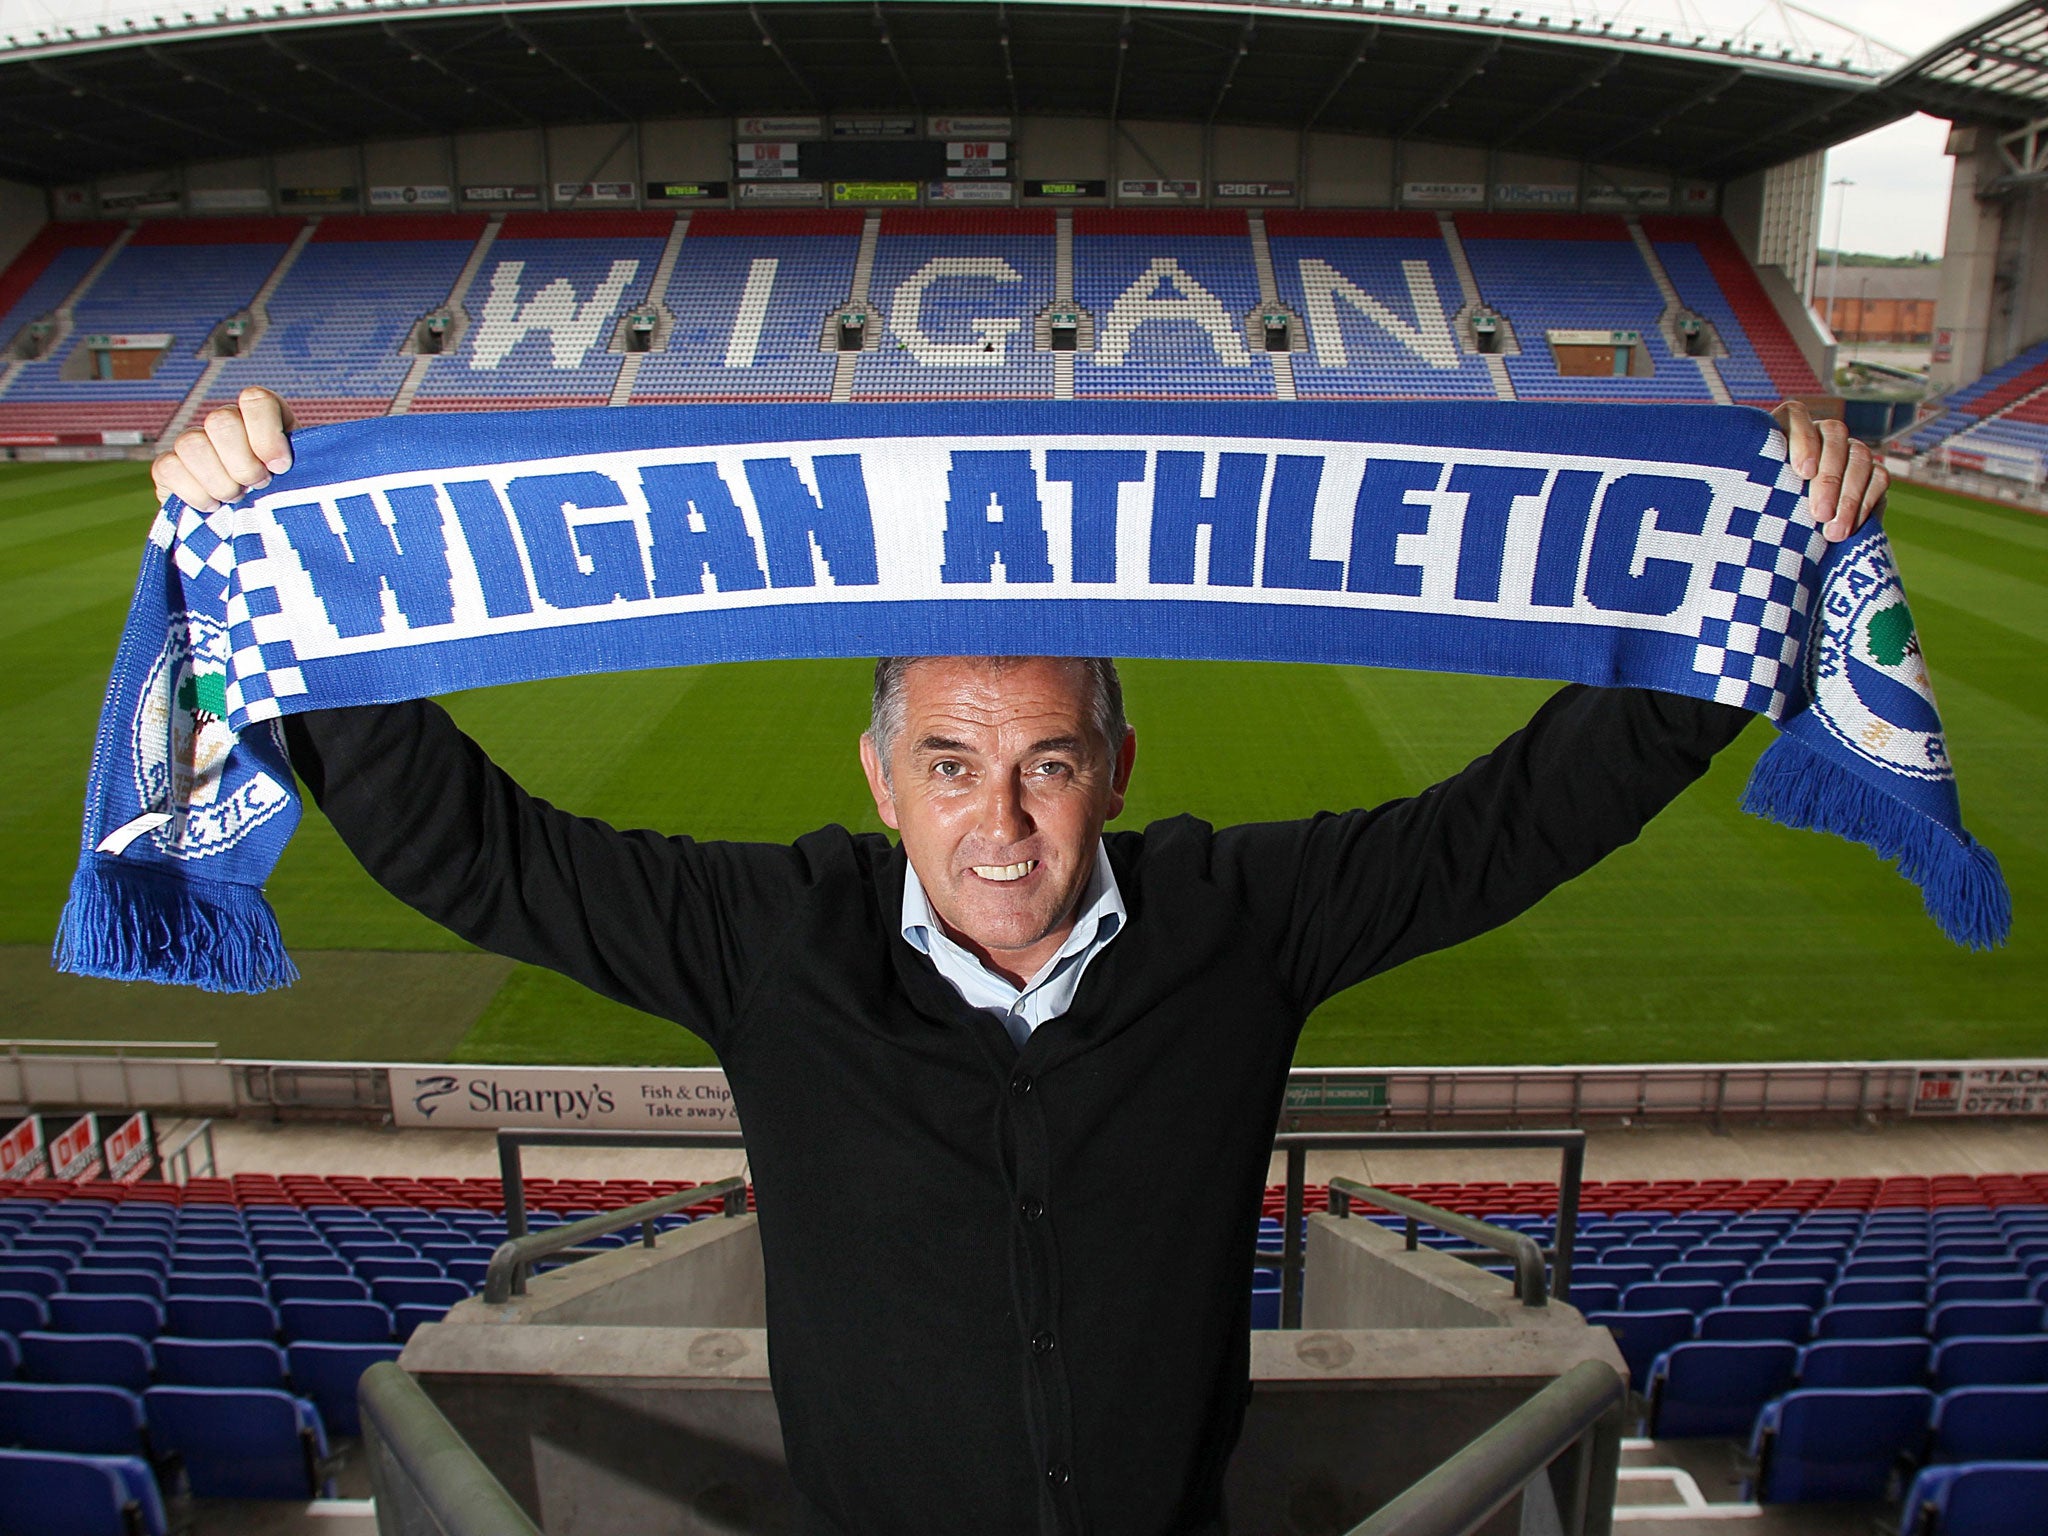 Wigan’s new manager Owen Coyle